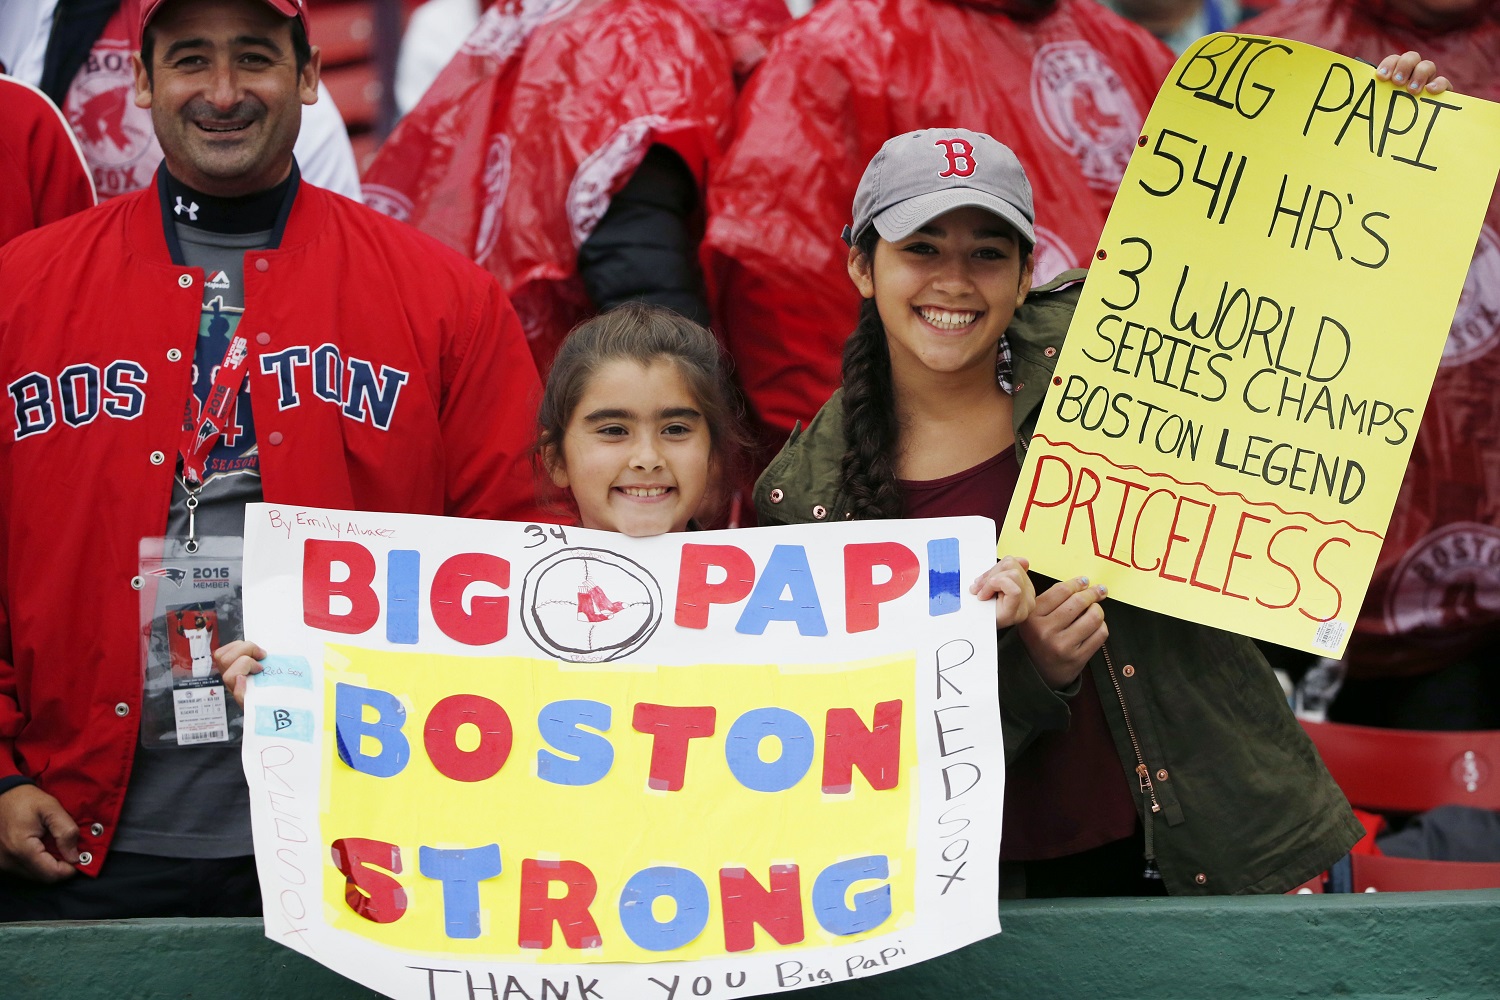 Fans hold signs during ceremonies ton honor Boston Red Sox's David Ortiz before a baseball game against the Toronto Blue Jays in Boston, Sunday, Oct. 2, 2016. (AP Photo/Michael Dwyer)